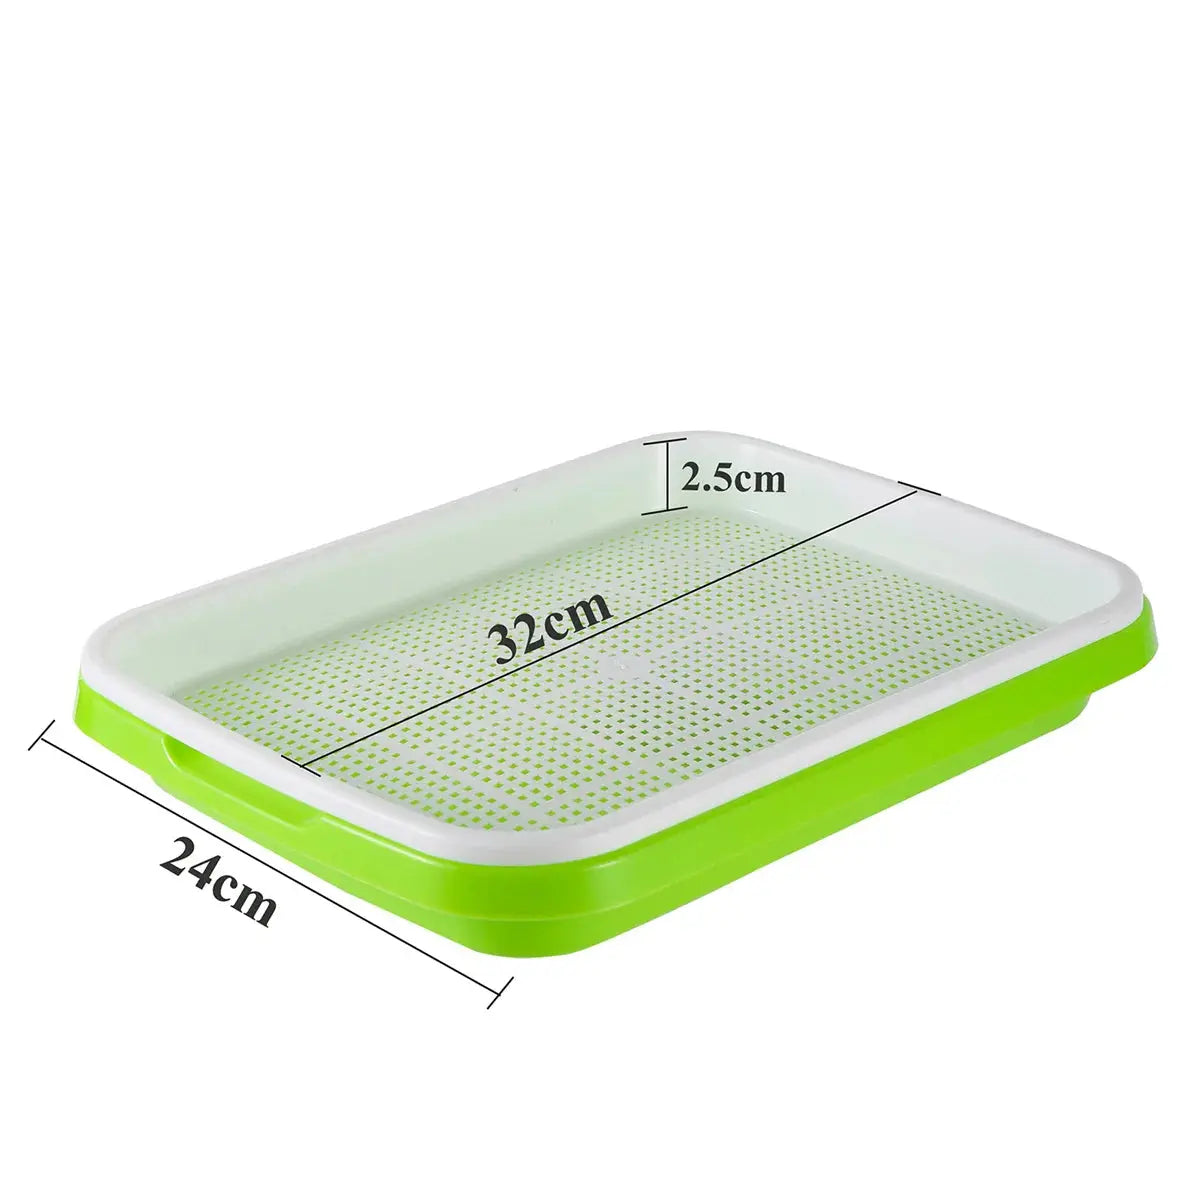 Sprouting Tray Shelf With Stainless Steel Tube Universal Brake Wheel Double Layer Seedling Germination Tray Yard Planting Frame - The Greenhouse Pros